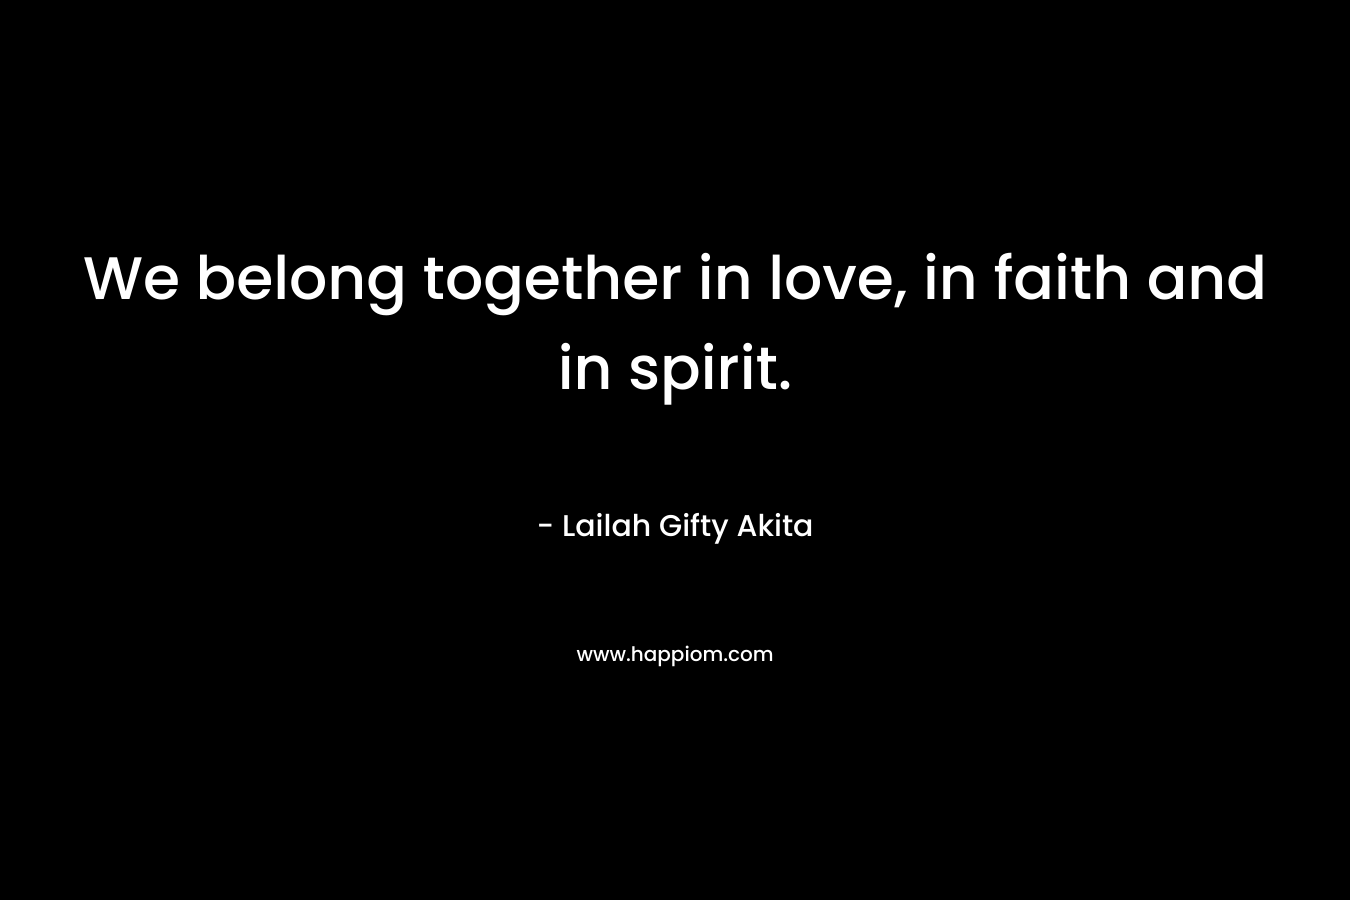 We belong together in love, in faith and in spirit.